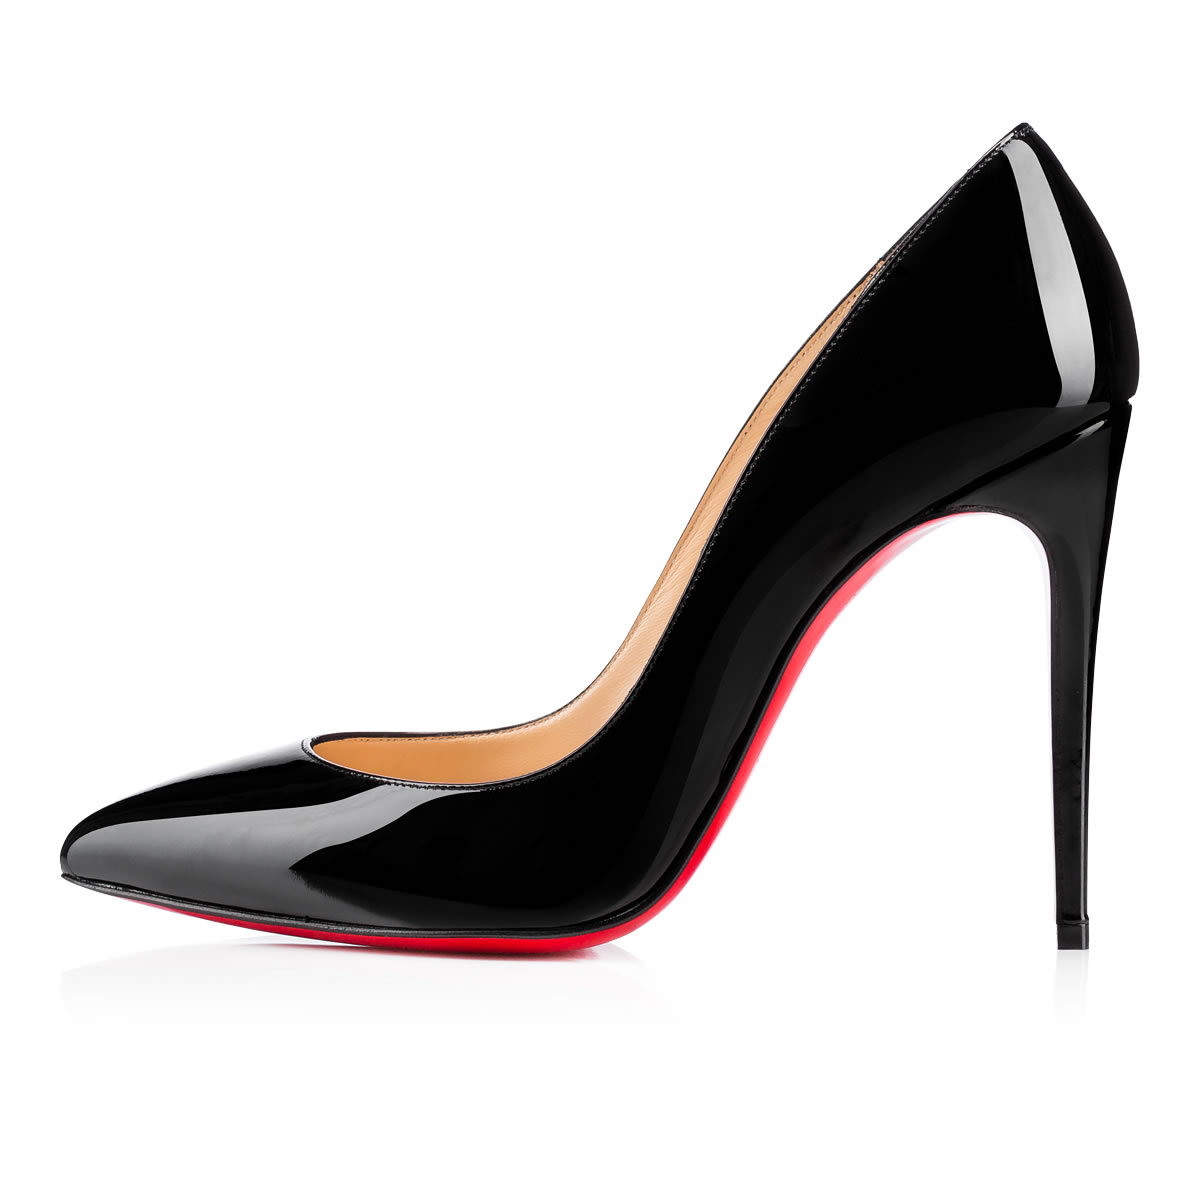 Intro into Louboutin 101: So Kate 120mm vs Pigalle Follies 100mm